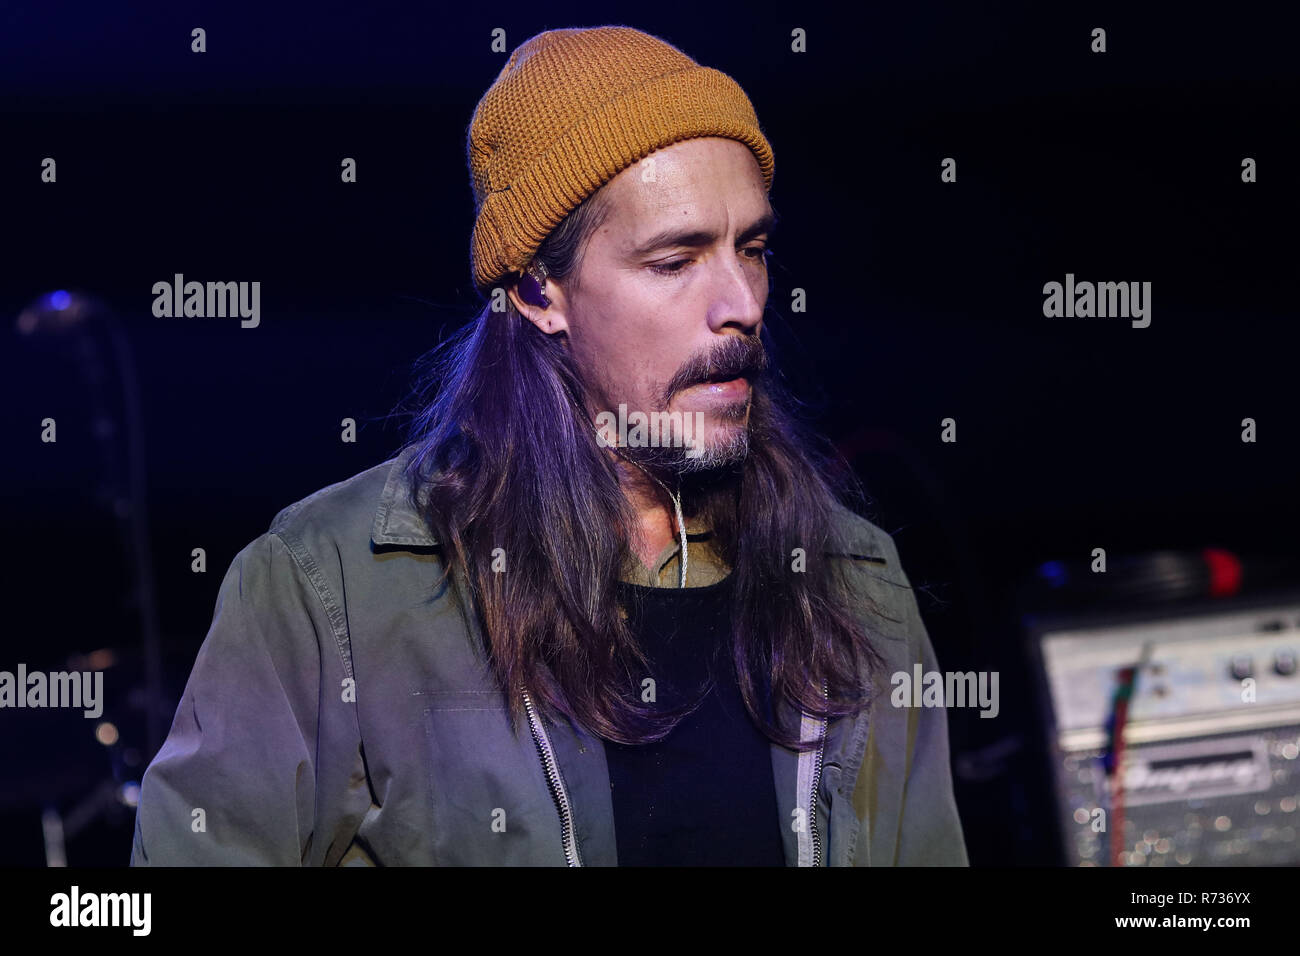 CALABASAS, LOS ANGELES, CA, USA - DECEMBER 02: Singer Brandon Boyd, Incubus performs onstage at the One Love Malibu Festival Benefit Concert For Wools Stock Photo